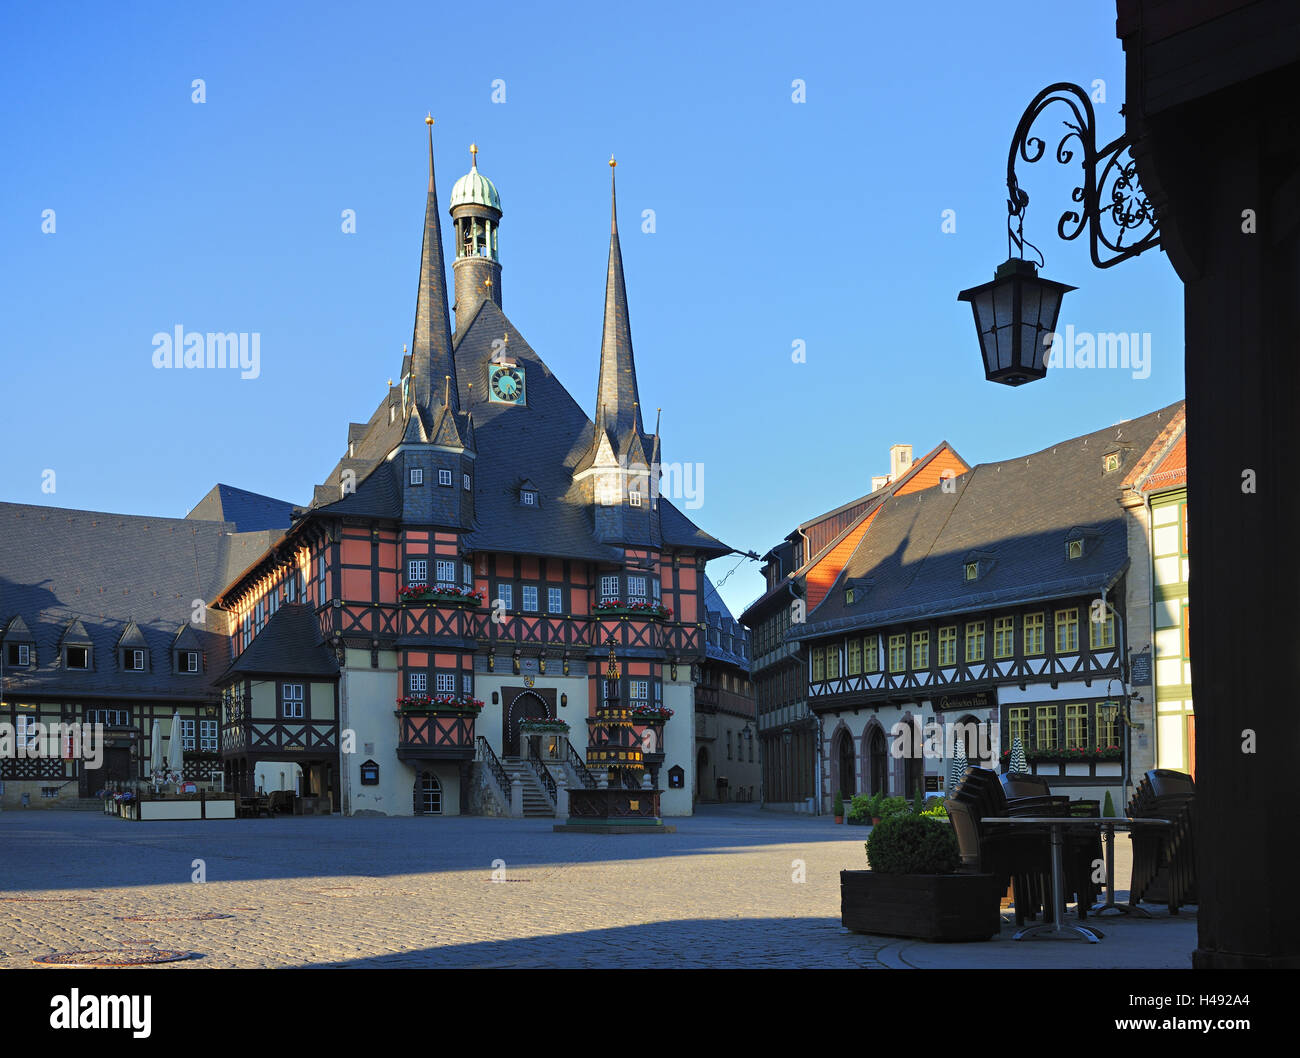 Germany, Saxony-Anhalt, resin, Wernigerode, city hall, outside, sunshine, heaven, blue, architectural style, Gothic, medievally, typically, half-timbered, Old Town, Idyll, building, architecture, tourism, place of interest, lane, half-timbered houses, his Stock Photo